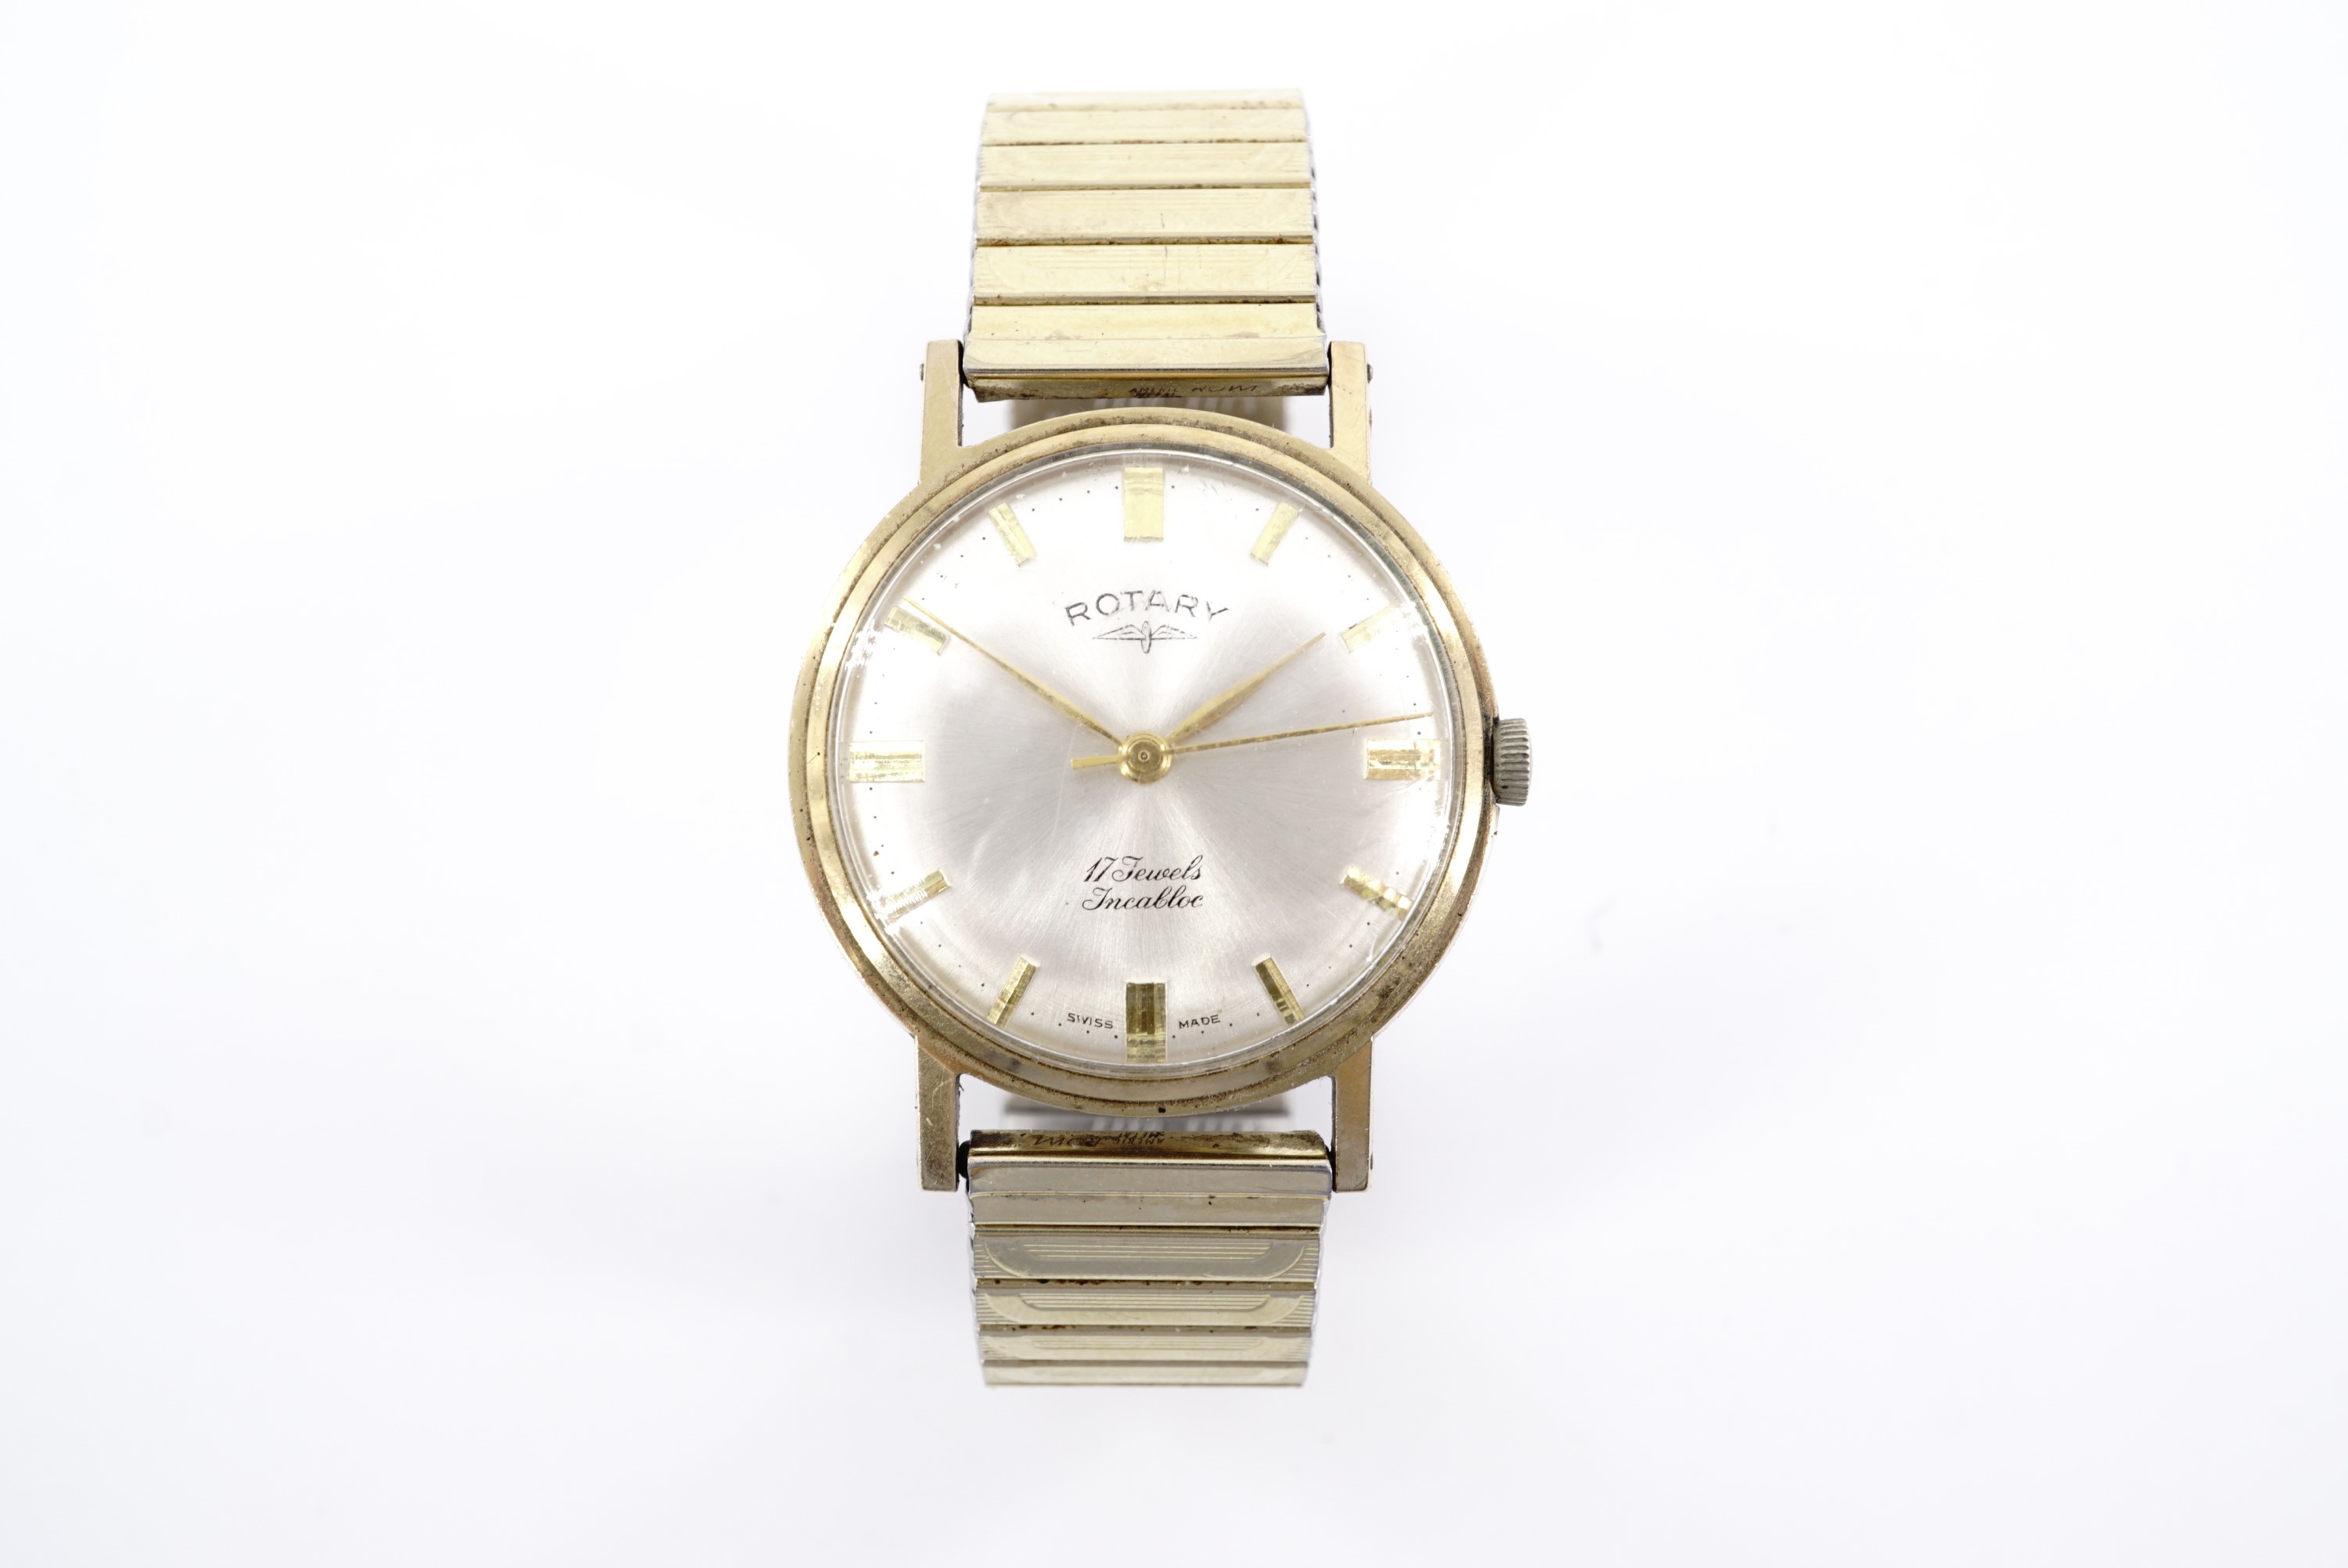 A 1960s Rotary 9 ct gold wristwatch, having a Swiss 17 jewel incabloc manual-wind movement and